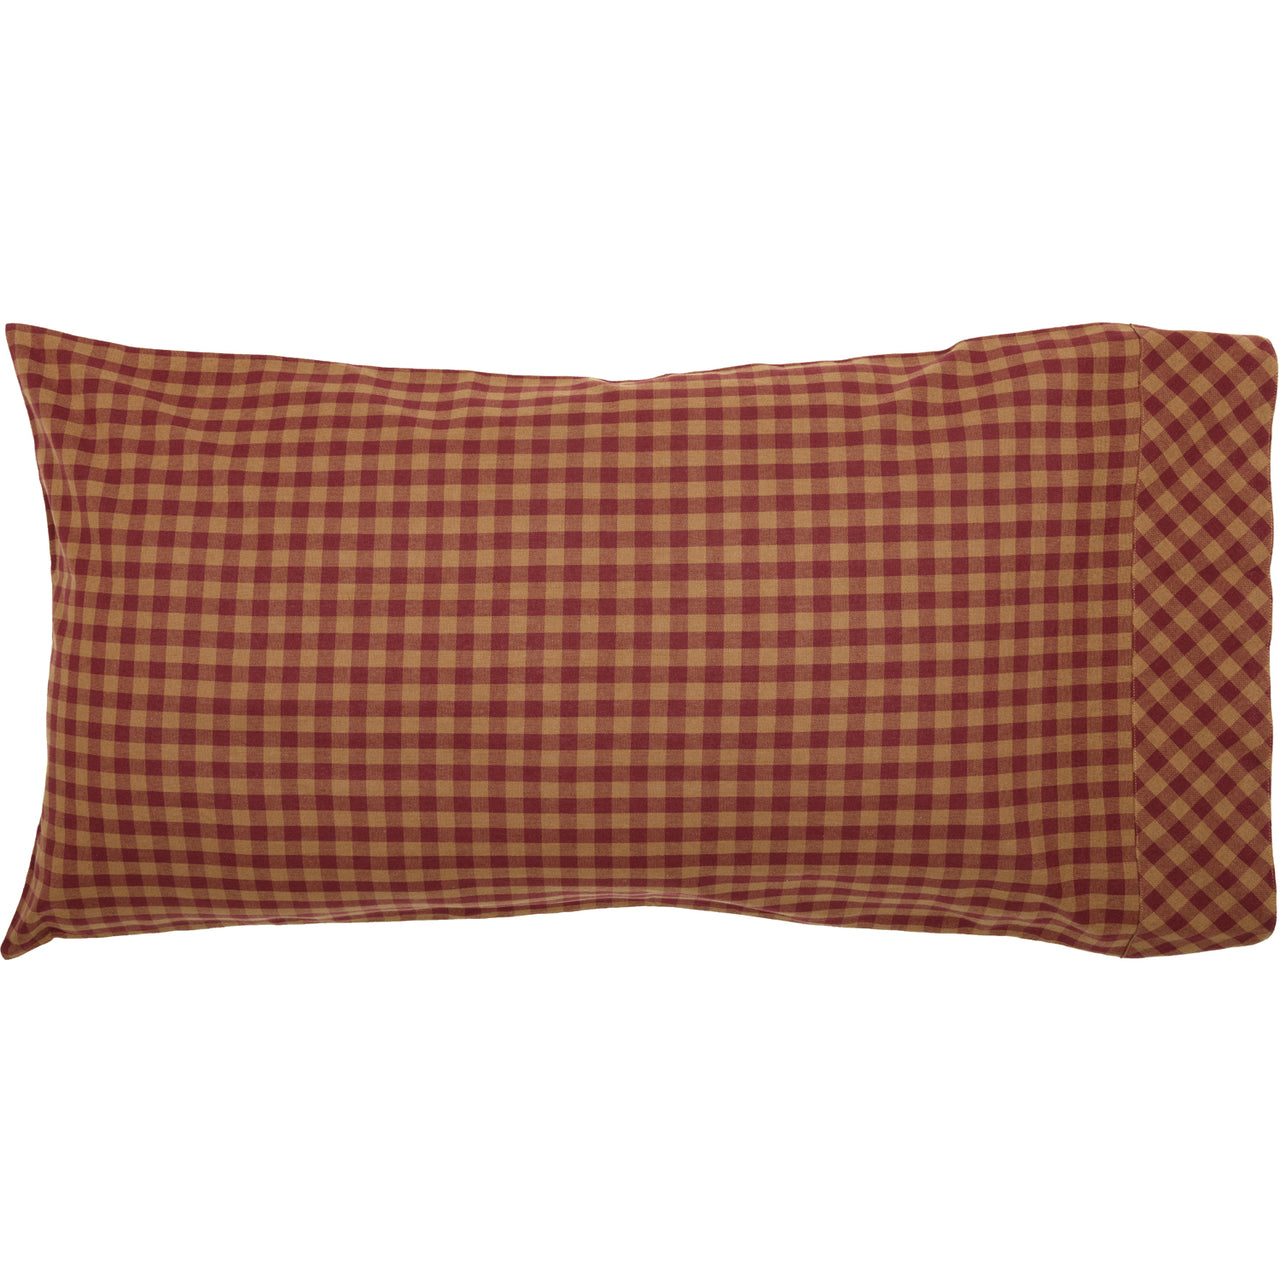 Burgundy Check King Pillow Case Set of 2 21x40 VHC Brands